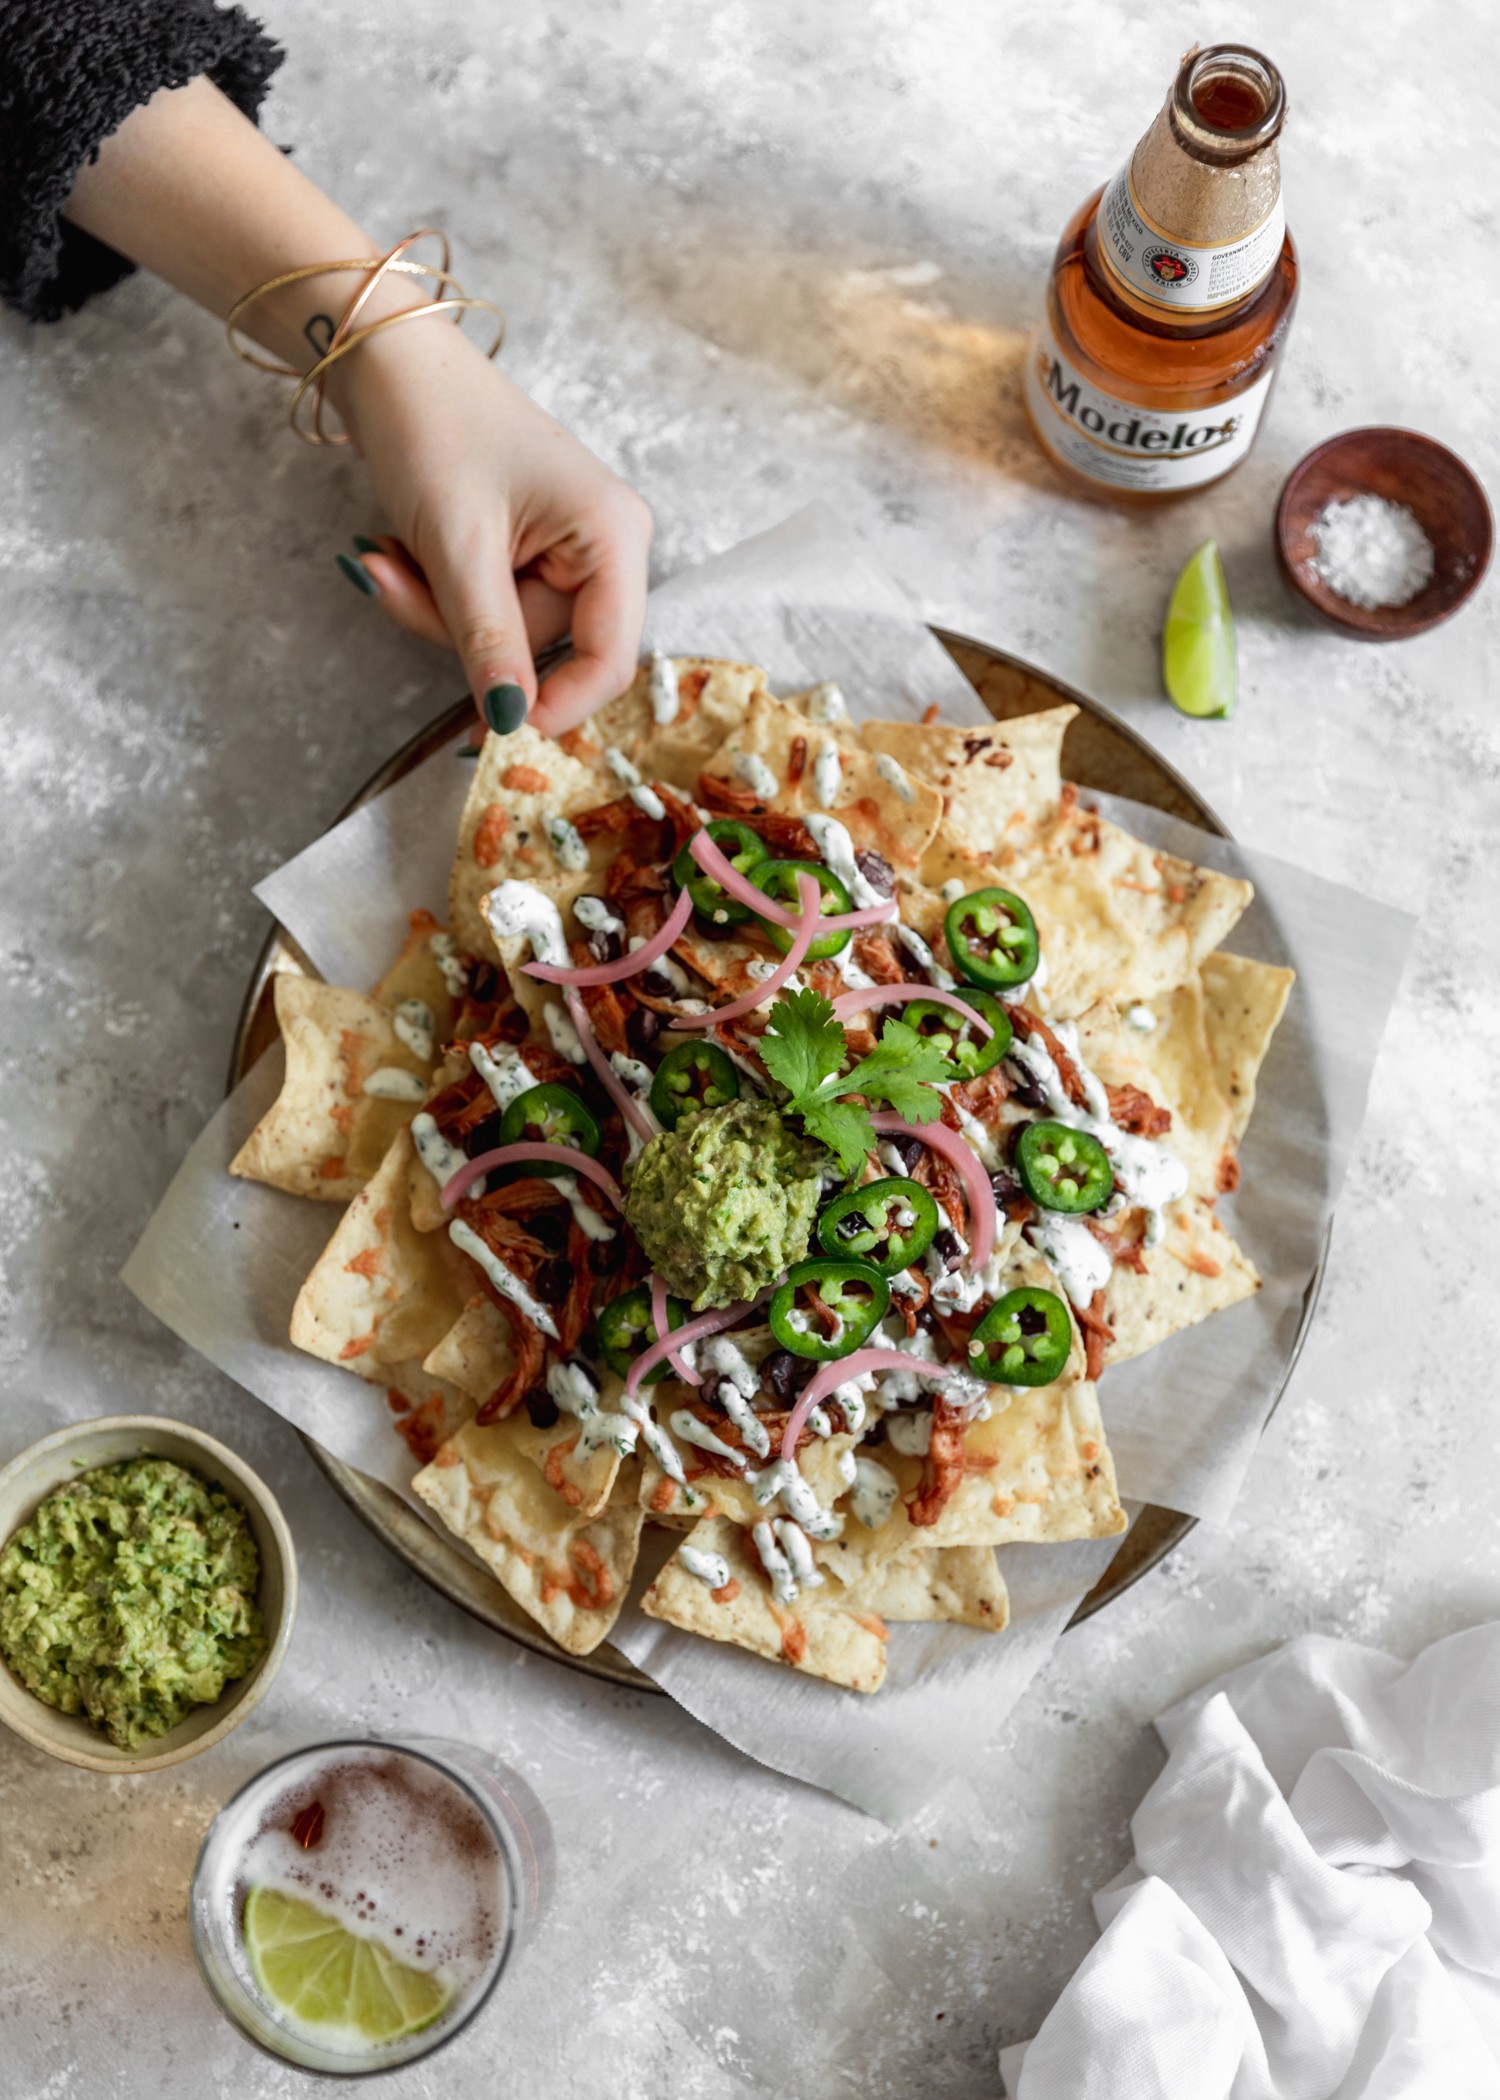 A woman's hand with bracelets and dark green nail polish reaching out to take a chip off of a plate of nachos on a grey table surrounded by ingredients.